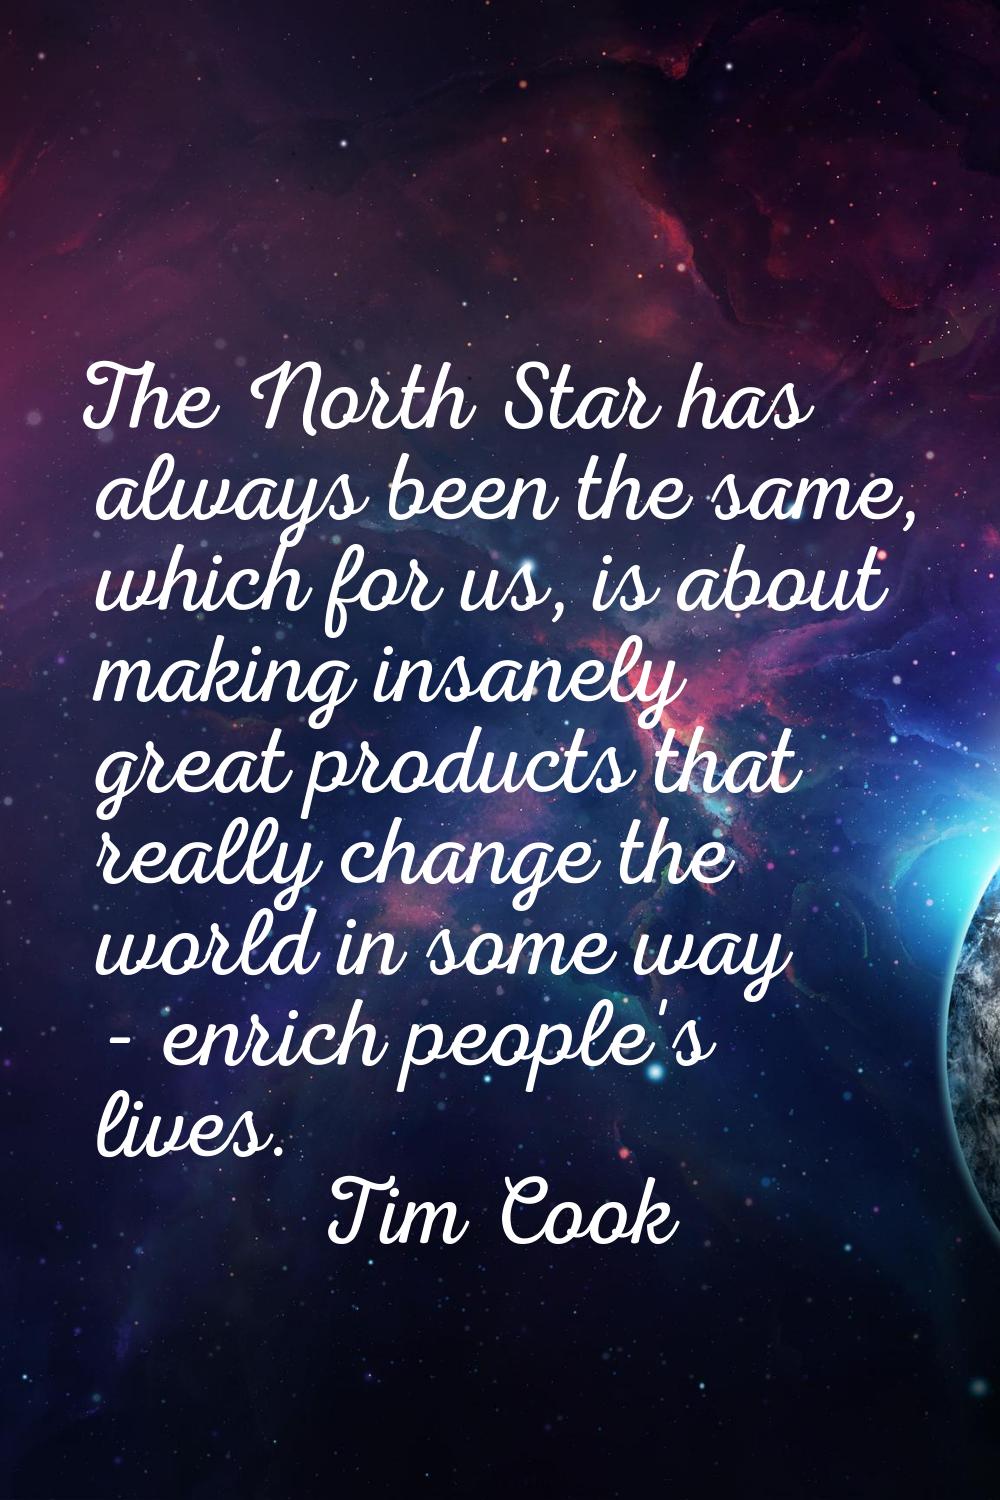 The North Star has always been the same, which for us, is about making insanely great products that